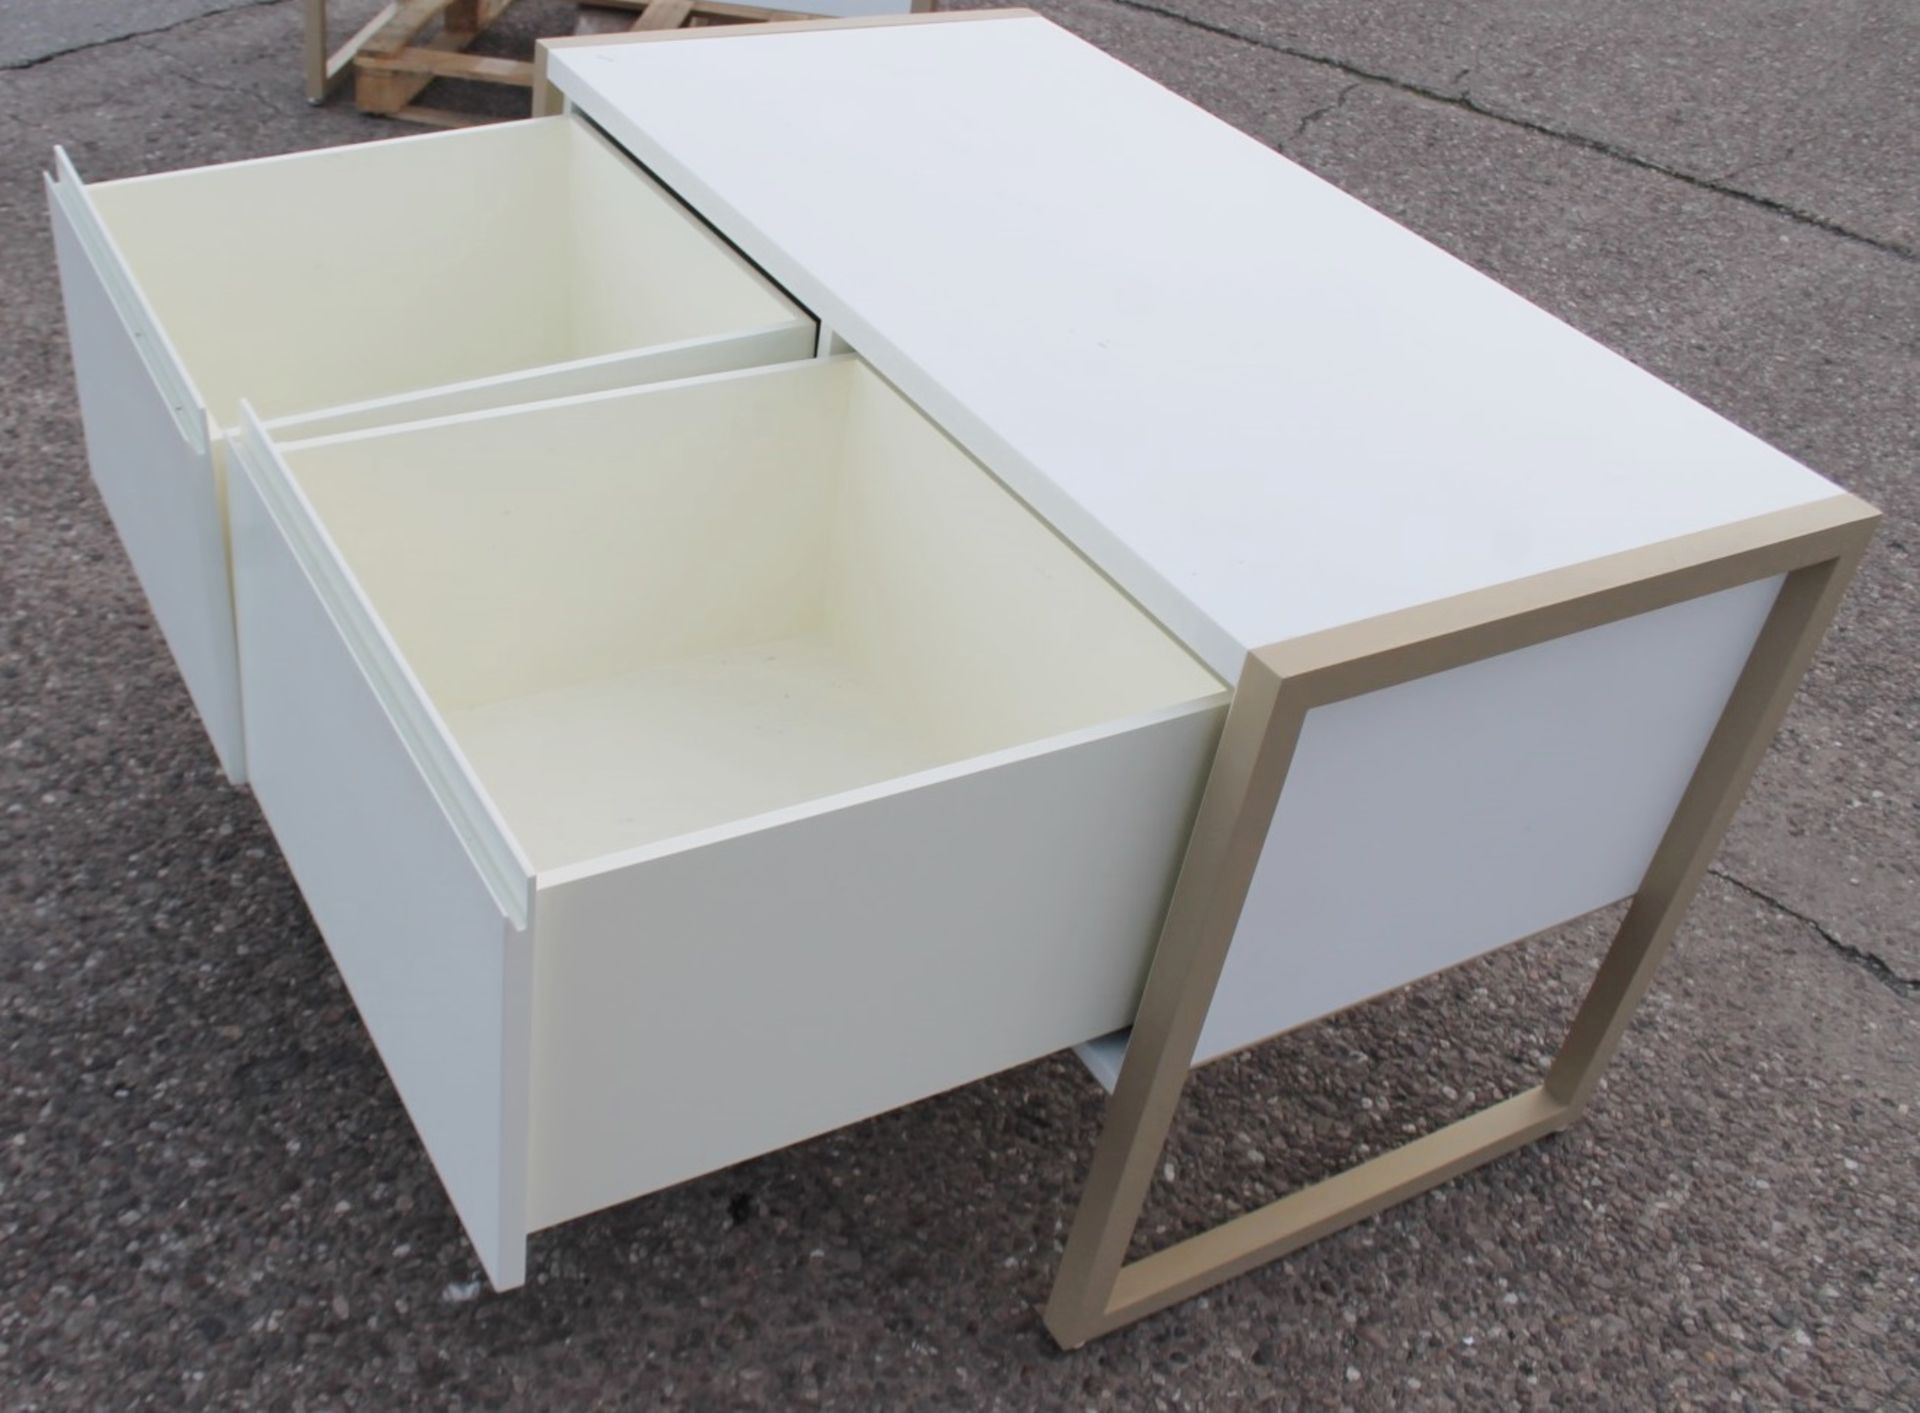 A Pair Of Large Matching Retail Display Units With 2-Drawer Storage In White And Gold - Image 2 of 8